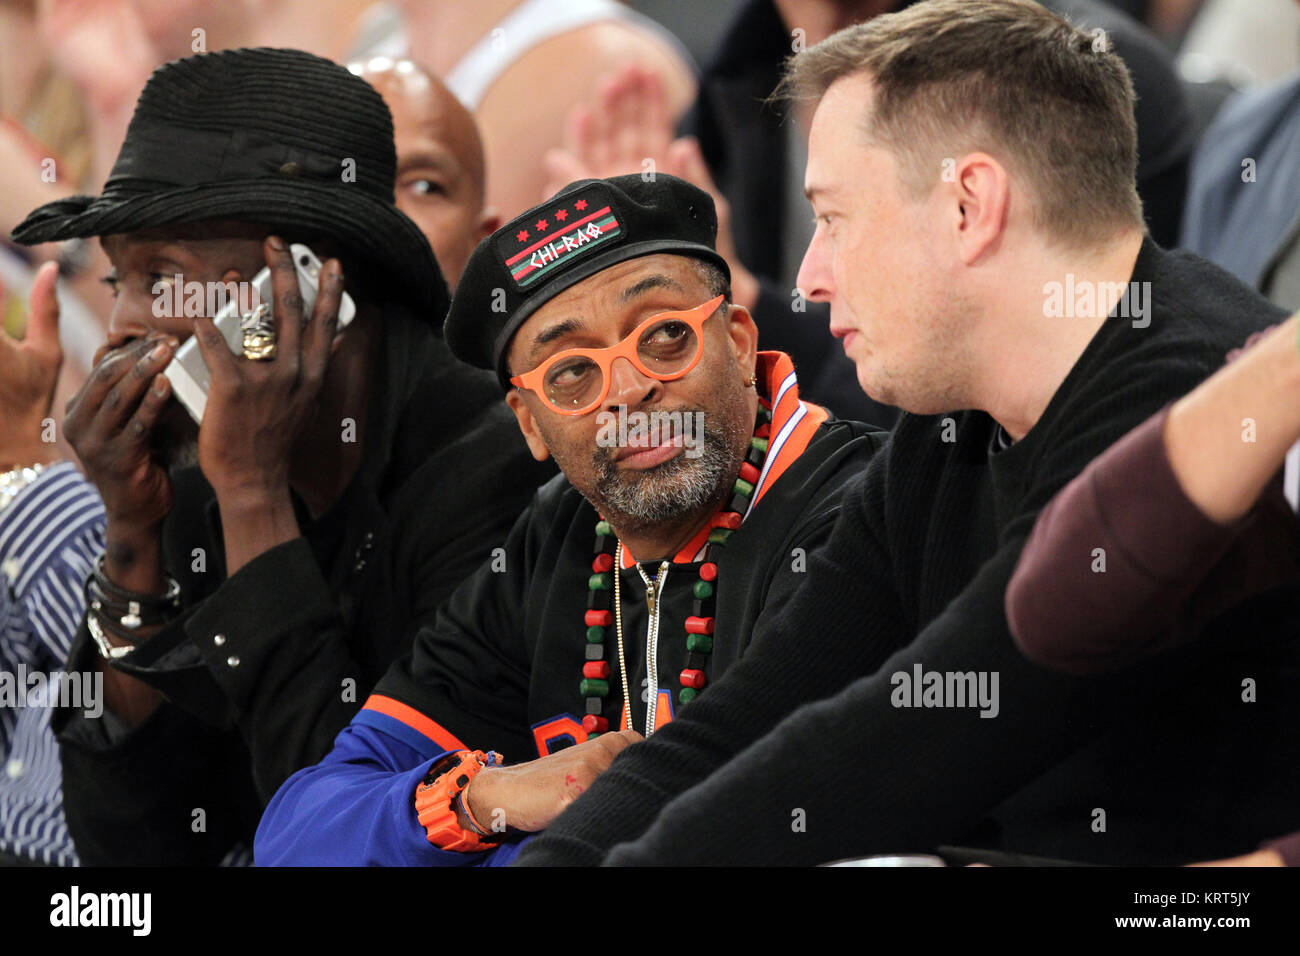 NEW YORK, NY - NOVEMBER 08: (Embargoed till November 10, 2015) Magic Johnson, Tracy Morgan with wife Megan Wollover sit with Michael K. Williams and  Director Spike Lee at the New York Knicks vs Los Angeles Lakers game at Madison Square Garden on November 8, 2015 in New York City.   People:  Michael K. Williams, Spike Lee Stock Photo